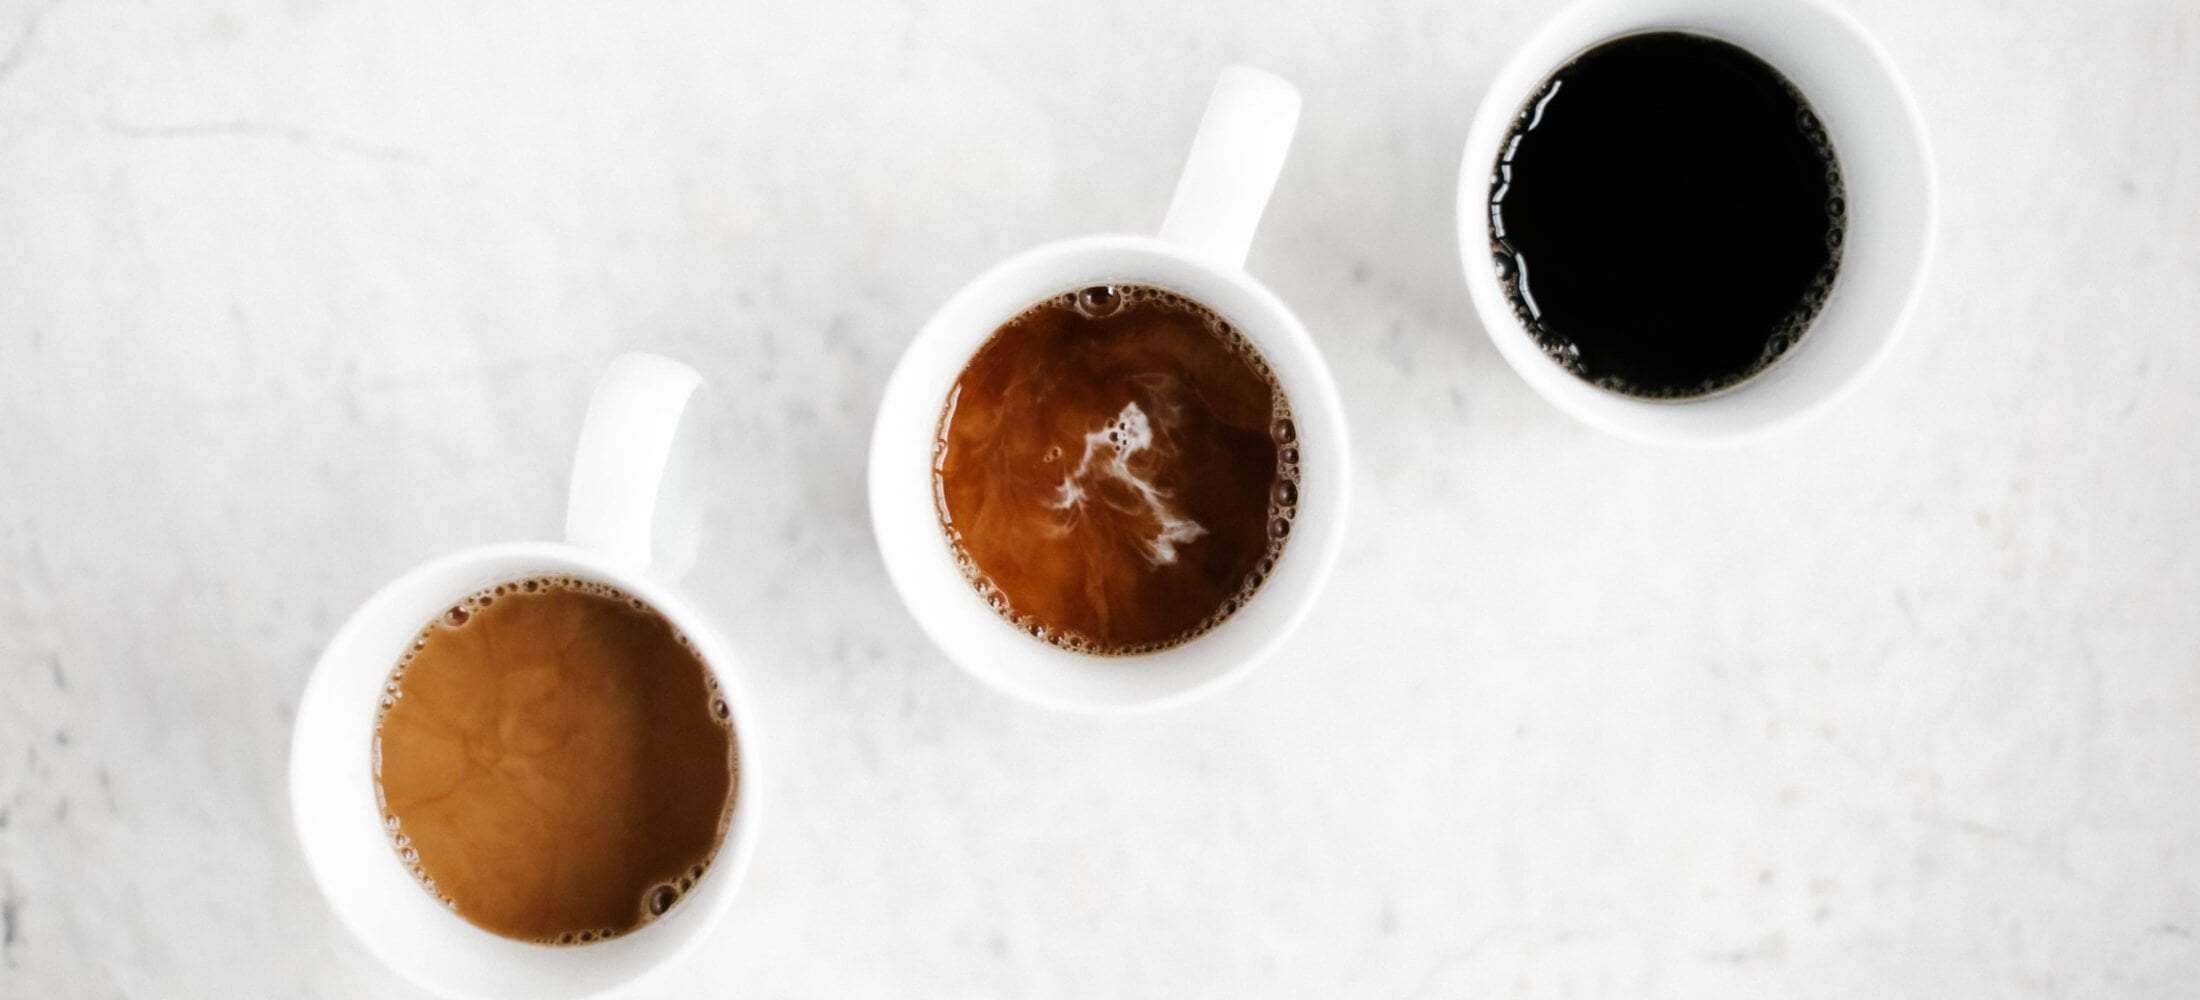 Yummy Coffee Creamer Pairings for Every Meal